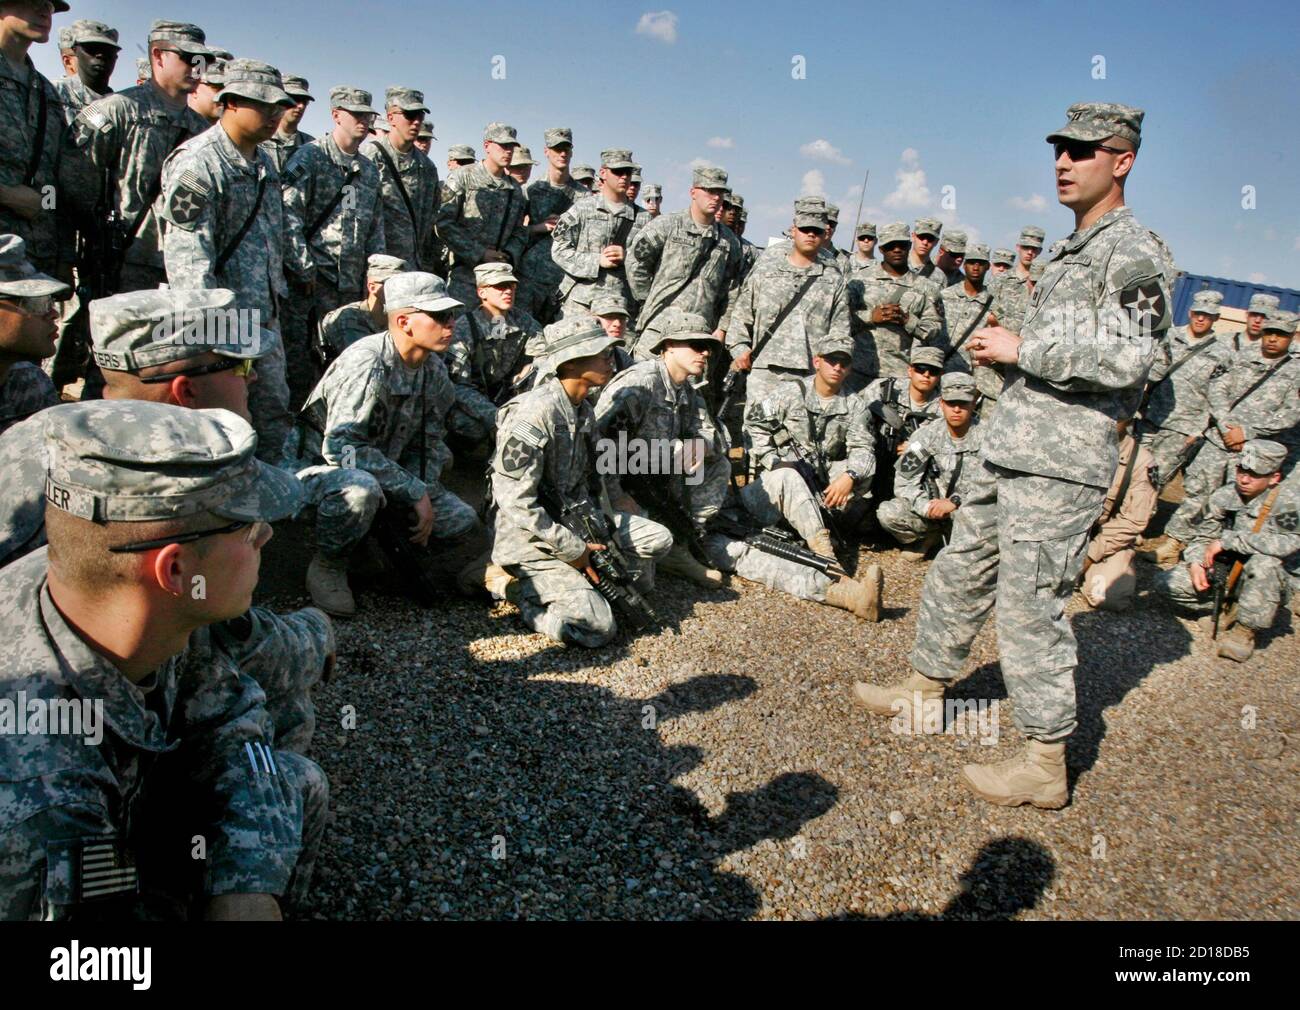 U.S. Army Captain Stephen Phillips (R), the commanding officer of Charlie Company, 2-3 Infantry, tells his troops their tour of Iraq is being extended for at least 90 days, at Taji Air Base north of Baghdad April 12, 2007. REUTERS/Bob Strong (IRAQ) Stock Photo